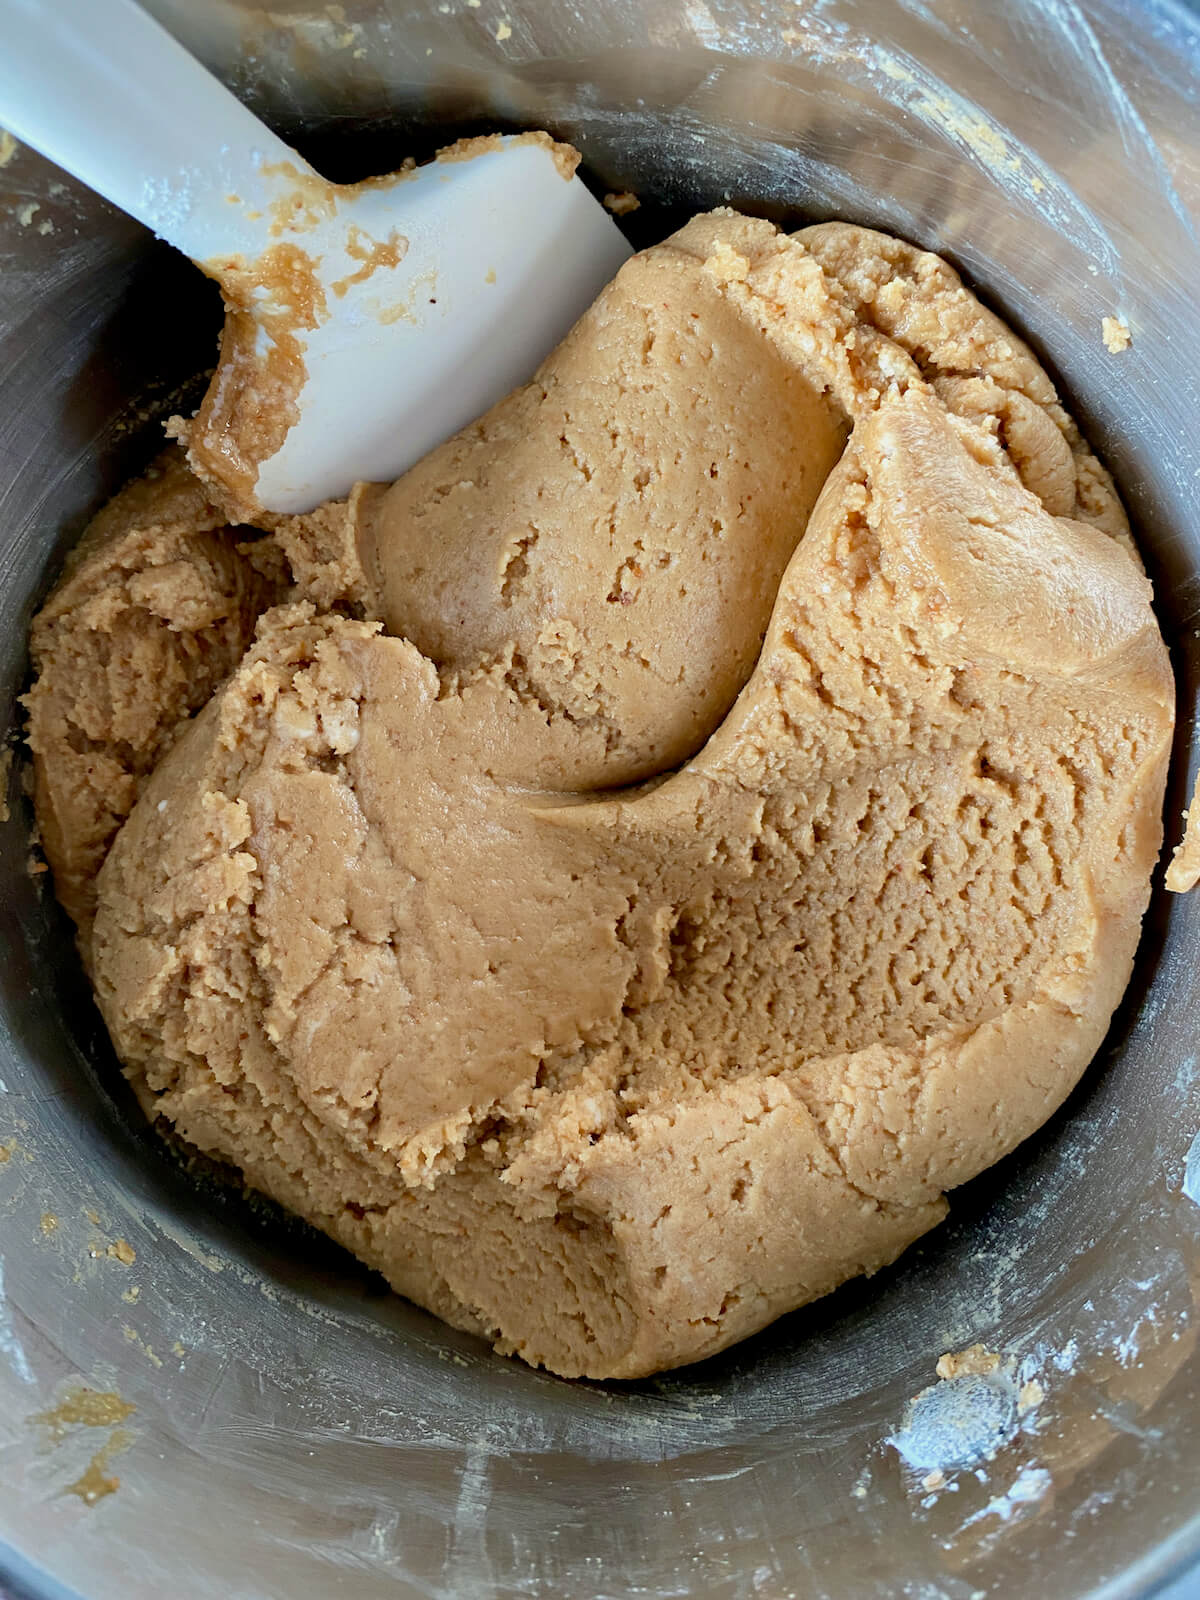 The peanut butter fudge mixture in a stainless steel pot with a rubber spatula sticking out.